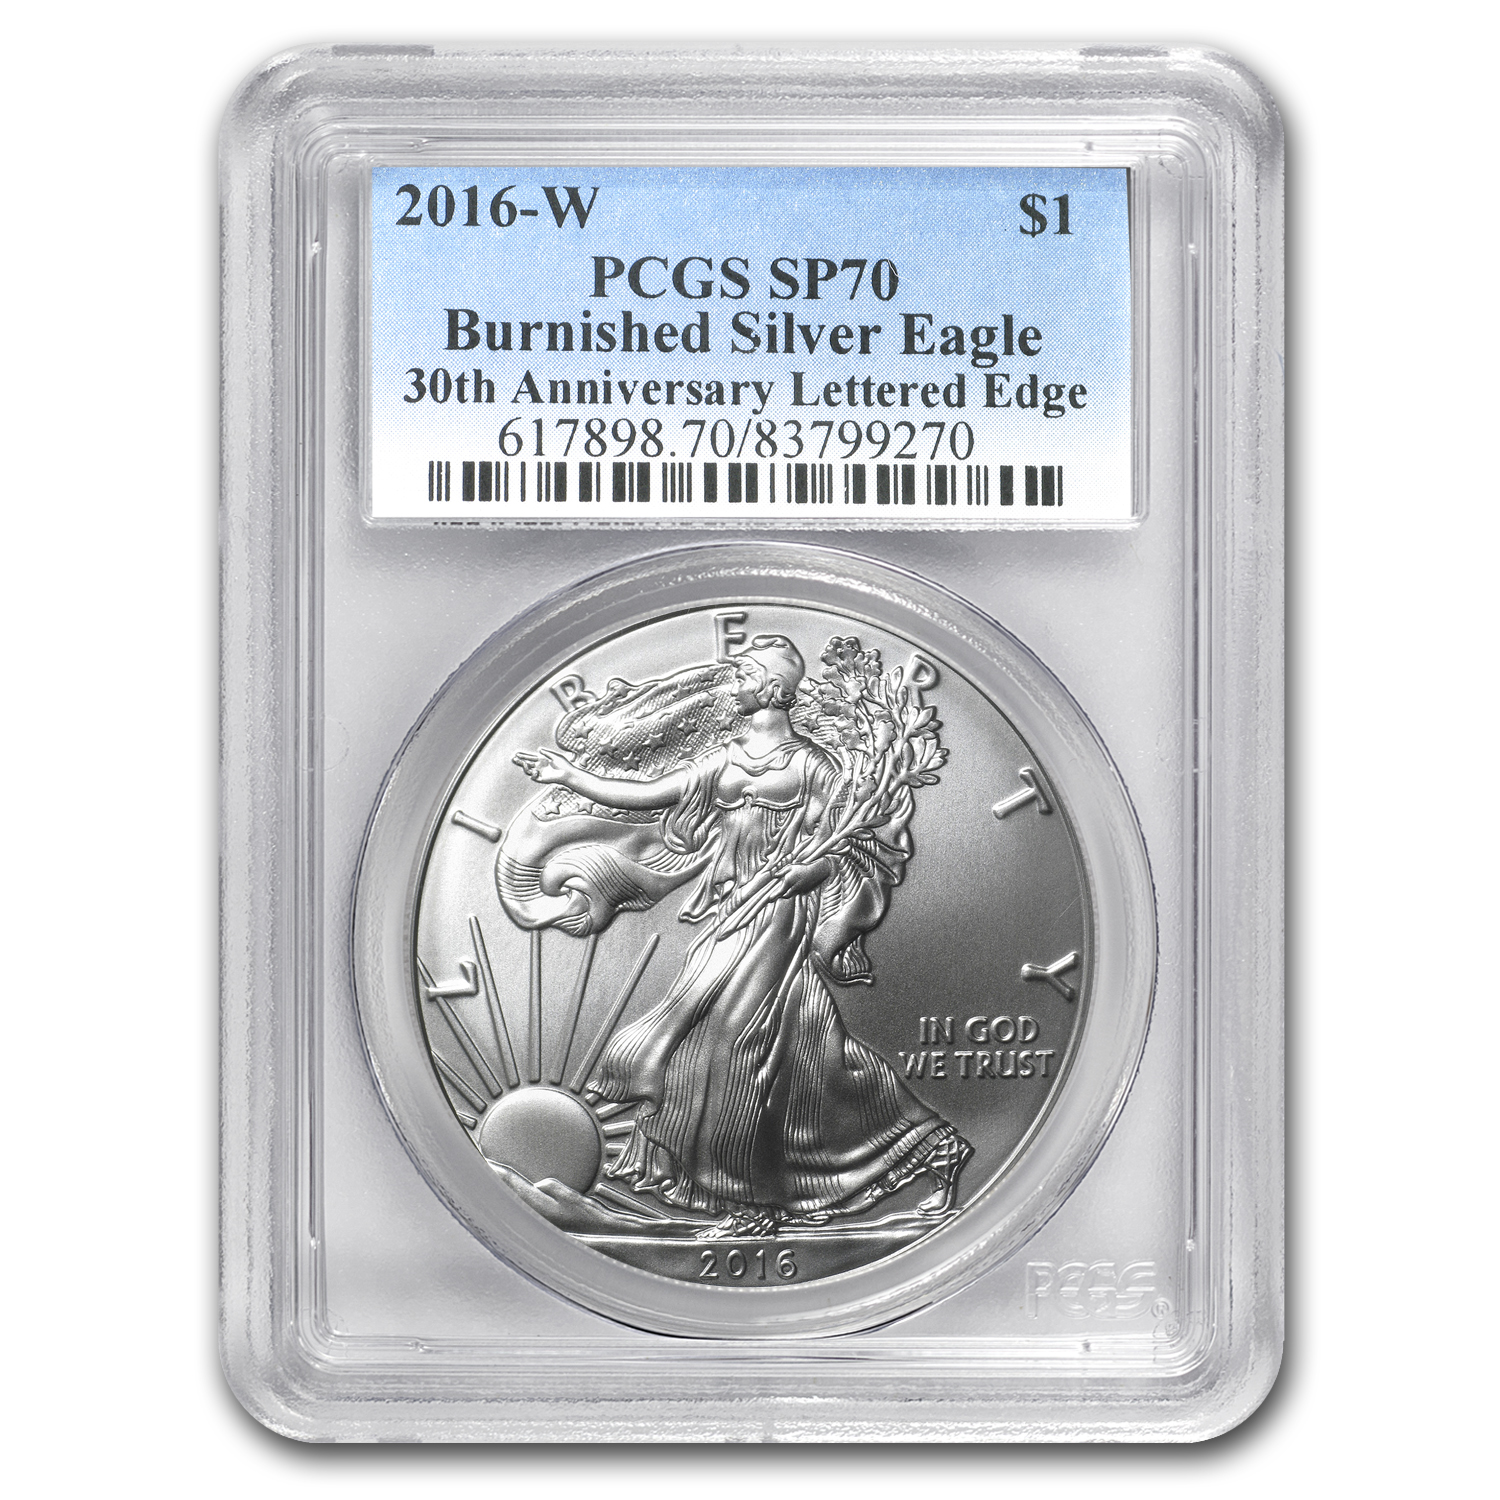 Buy 2016-W Burnished Silver Eagle SP-70 PCGS